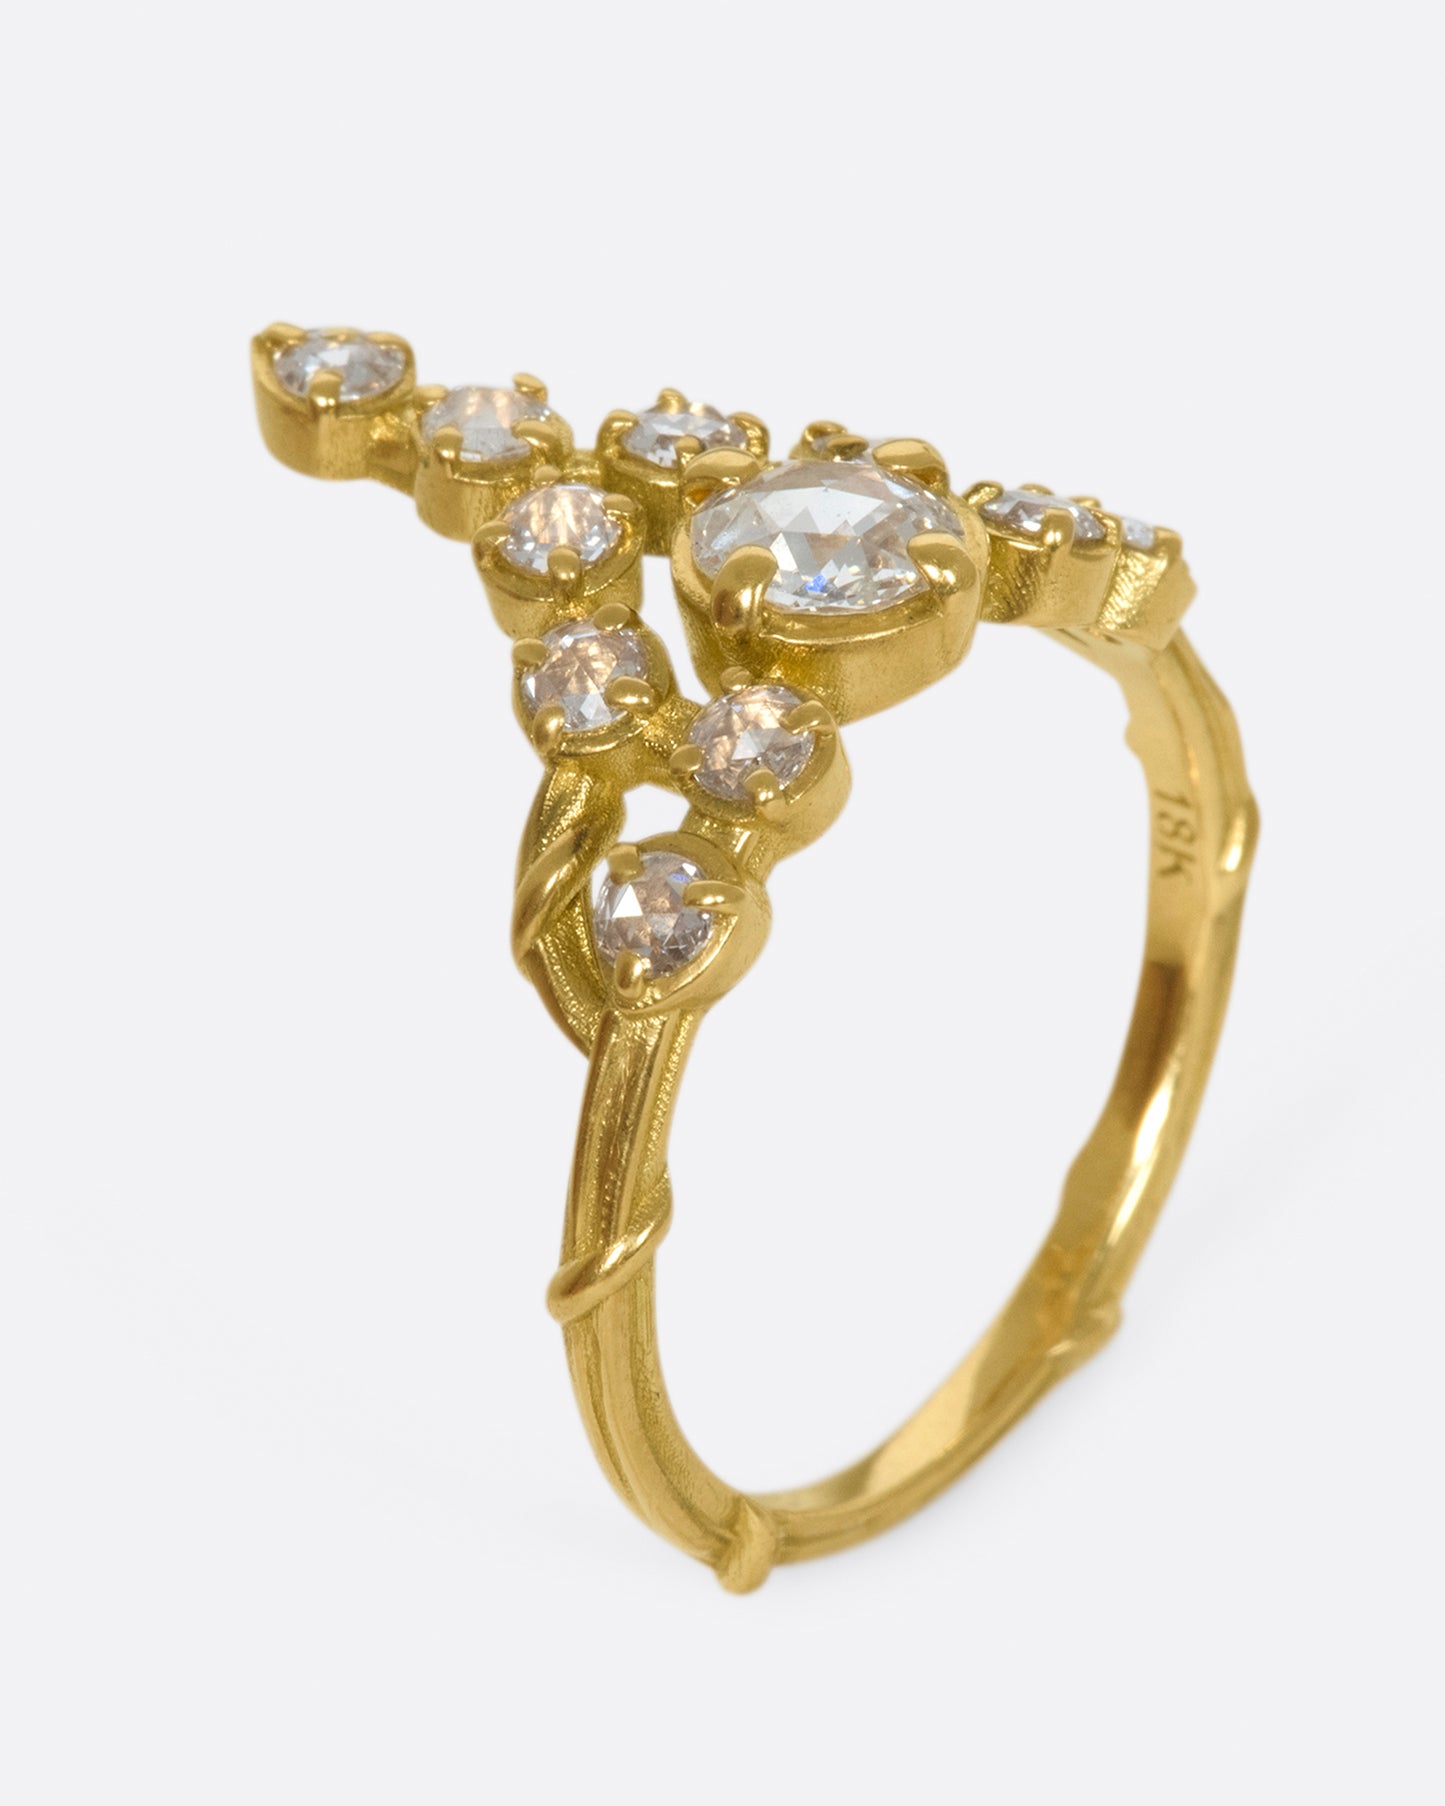 This ring makes a statement, but is also comfortable for everyday wear and is inspired by the ultimate power accessory, a tiara,